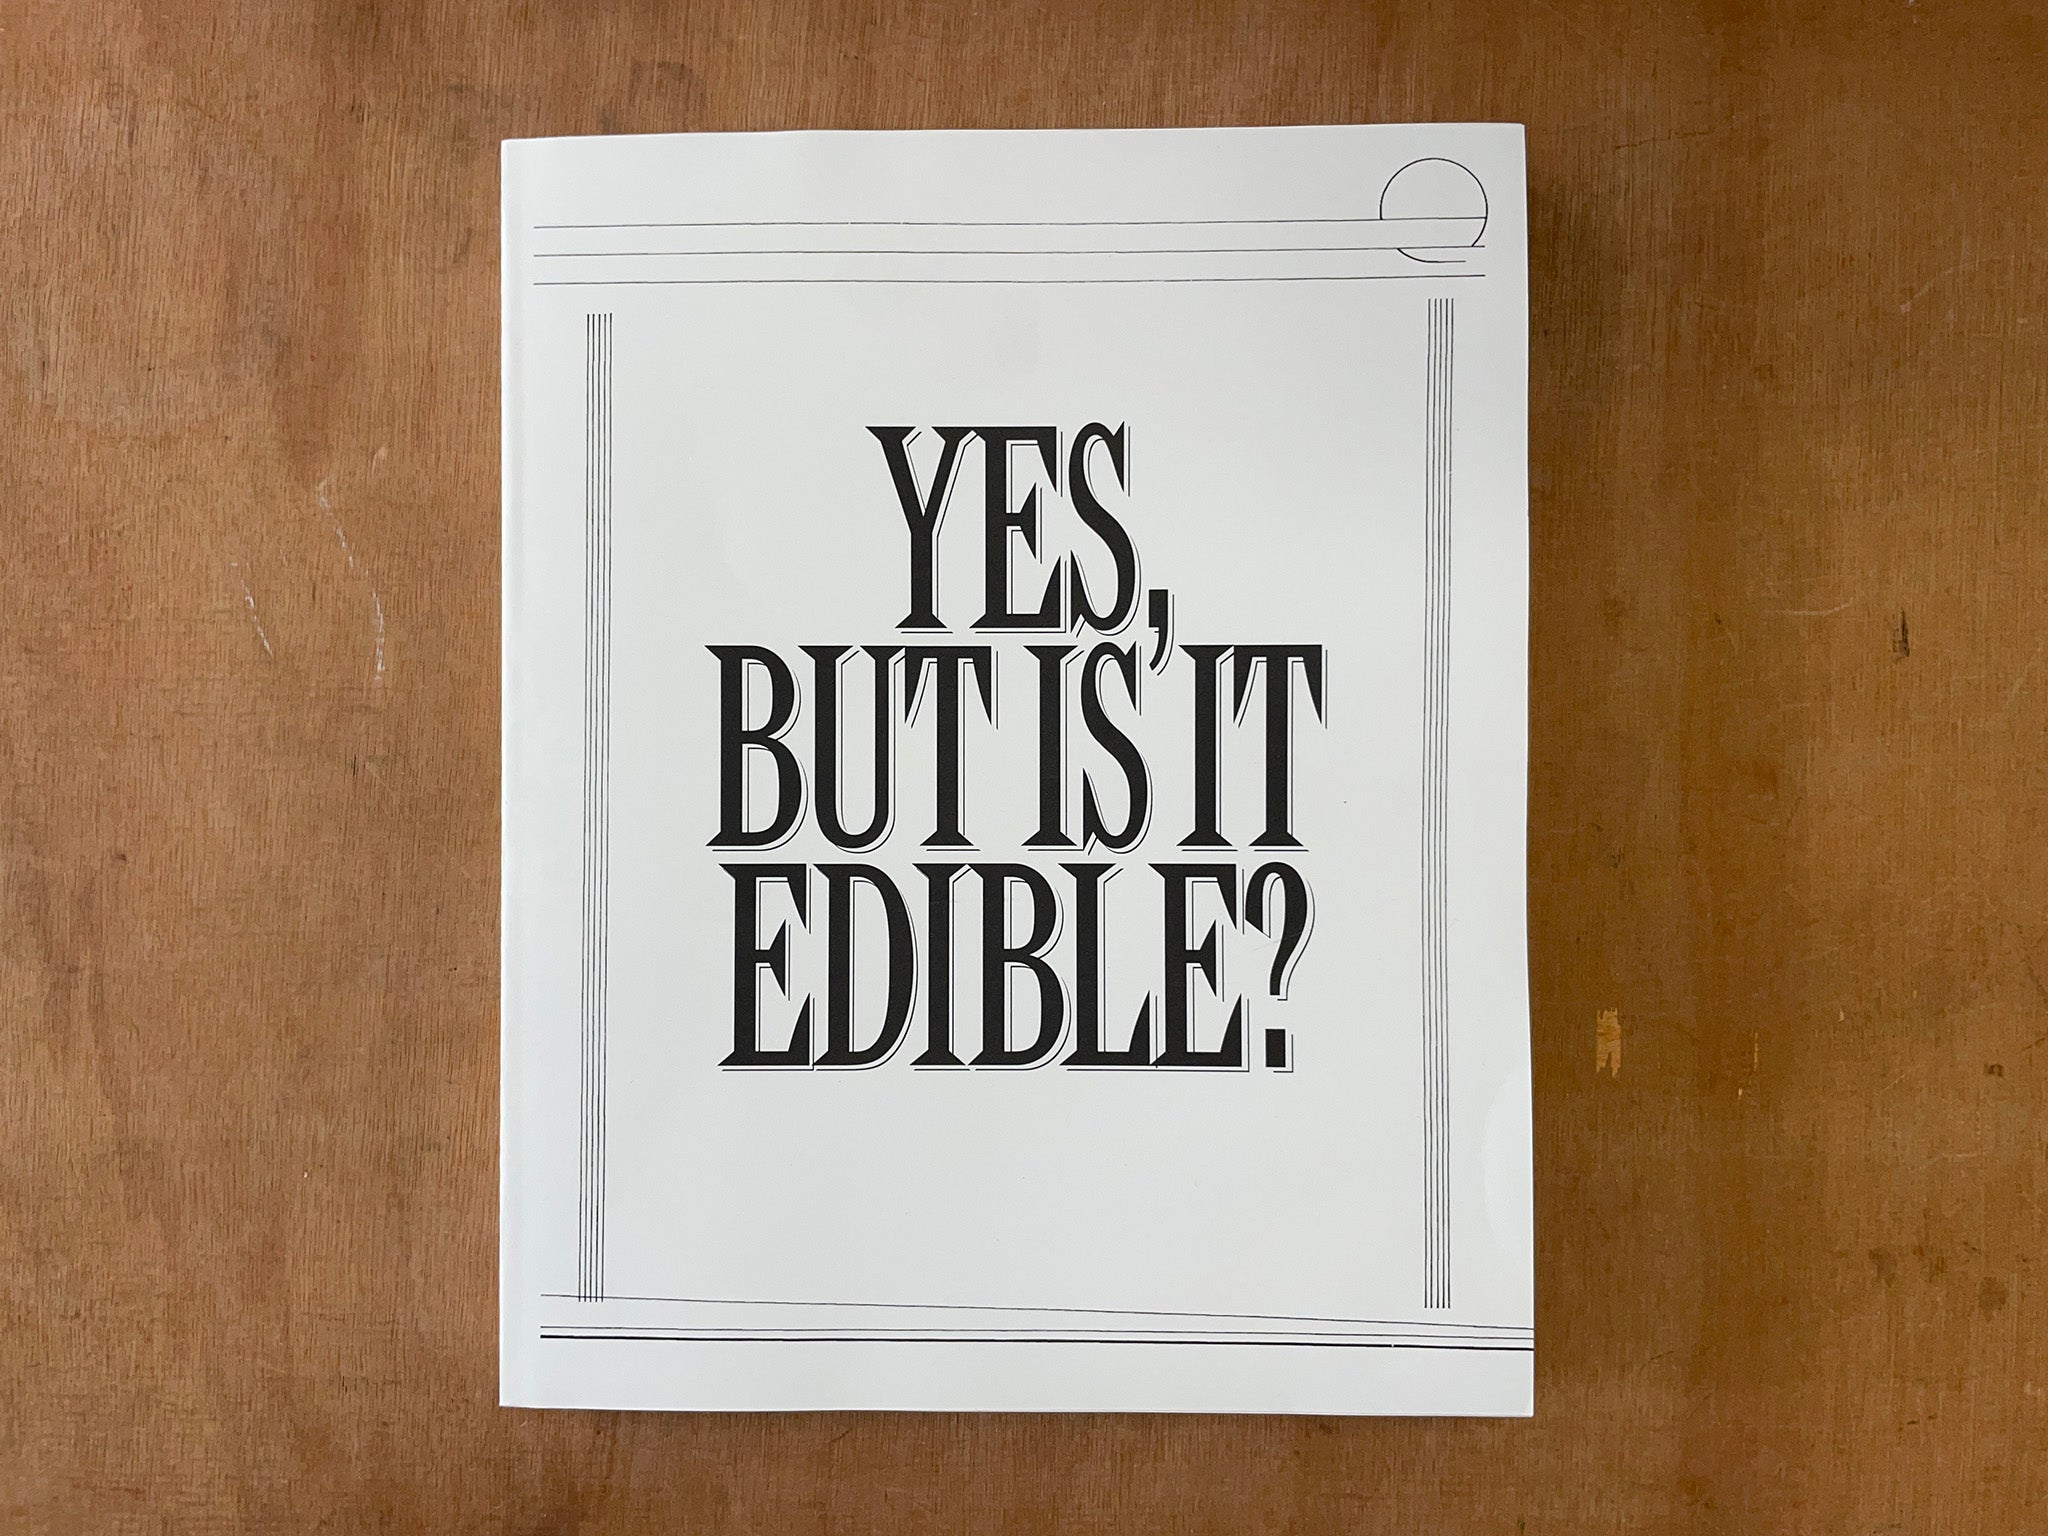 YES, BUT IS IT EDIBLE